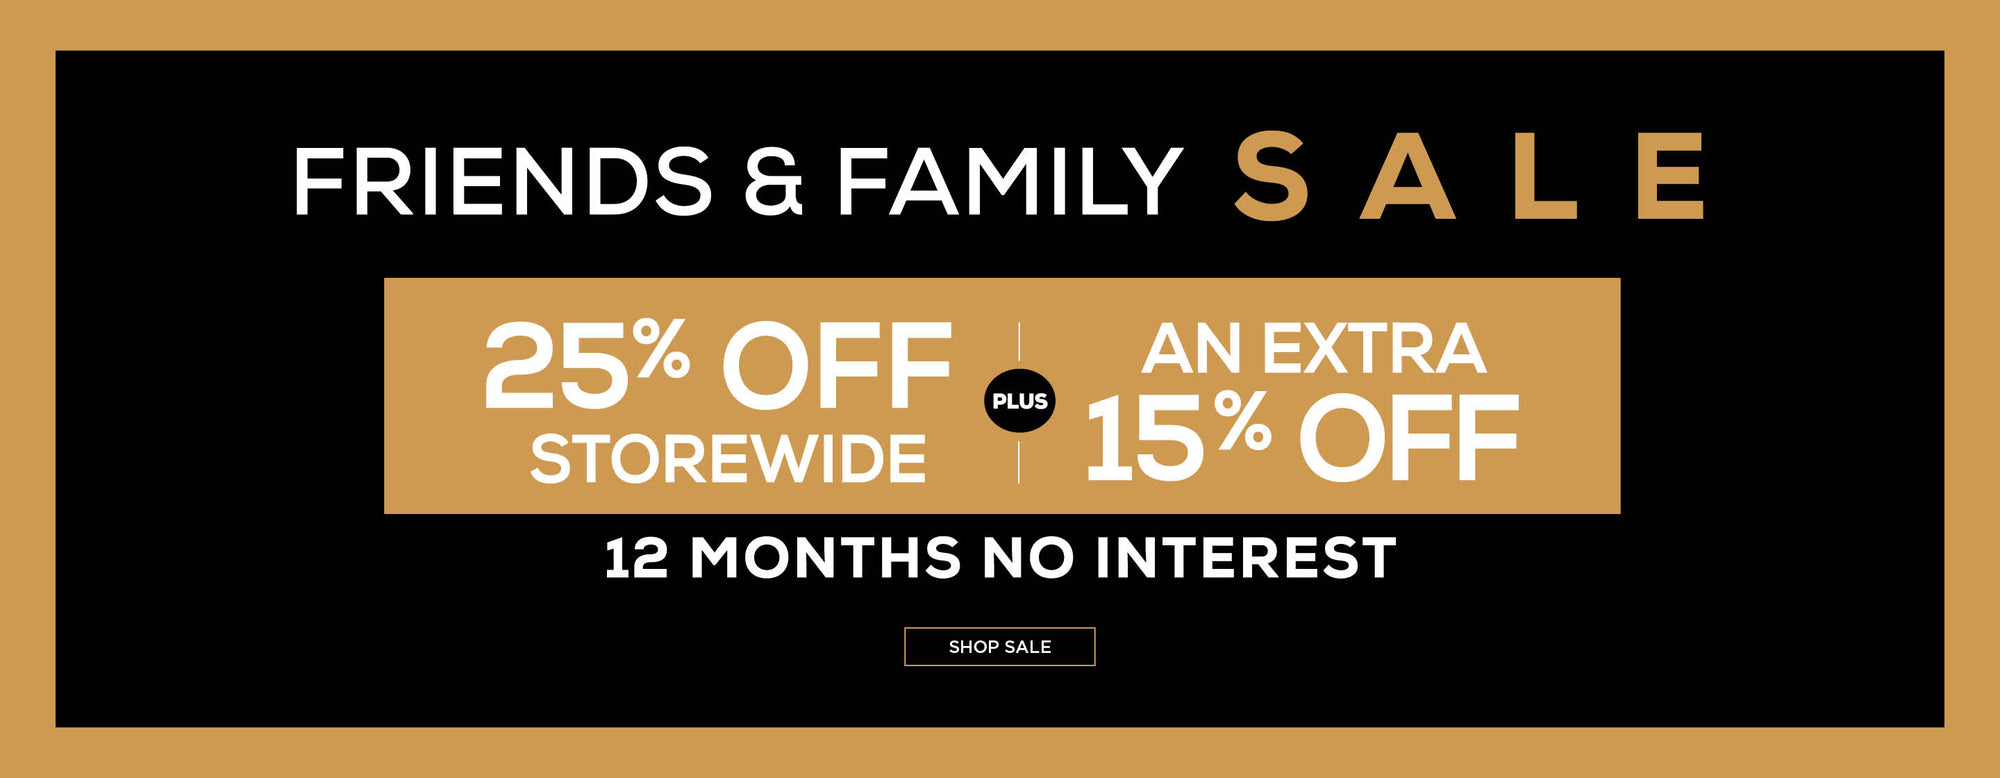 A wide, rectangular banner with a black and gold color scheme advertising a Friends & Family sale. It offers '25% OFF STOREWIDE' plus an extra '15% OFF' as indicated by two separate, prominent text blocks. Below, in smaller text, is '12 MONTHS NO INTEREST.' A call to action at the bottom reads 'SHOP SALE' inside a black button.